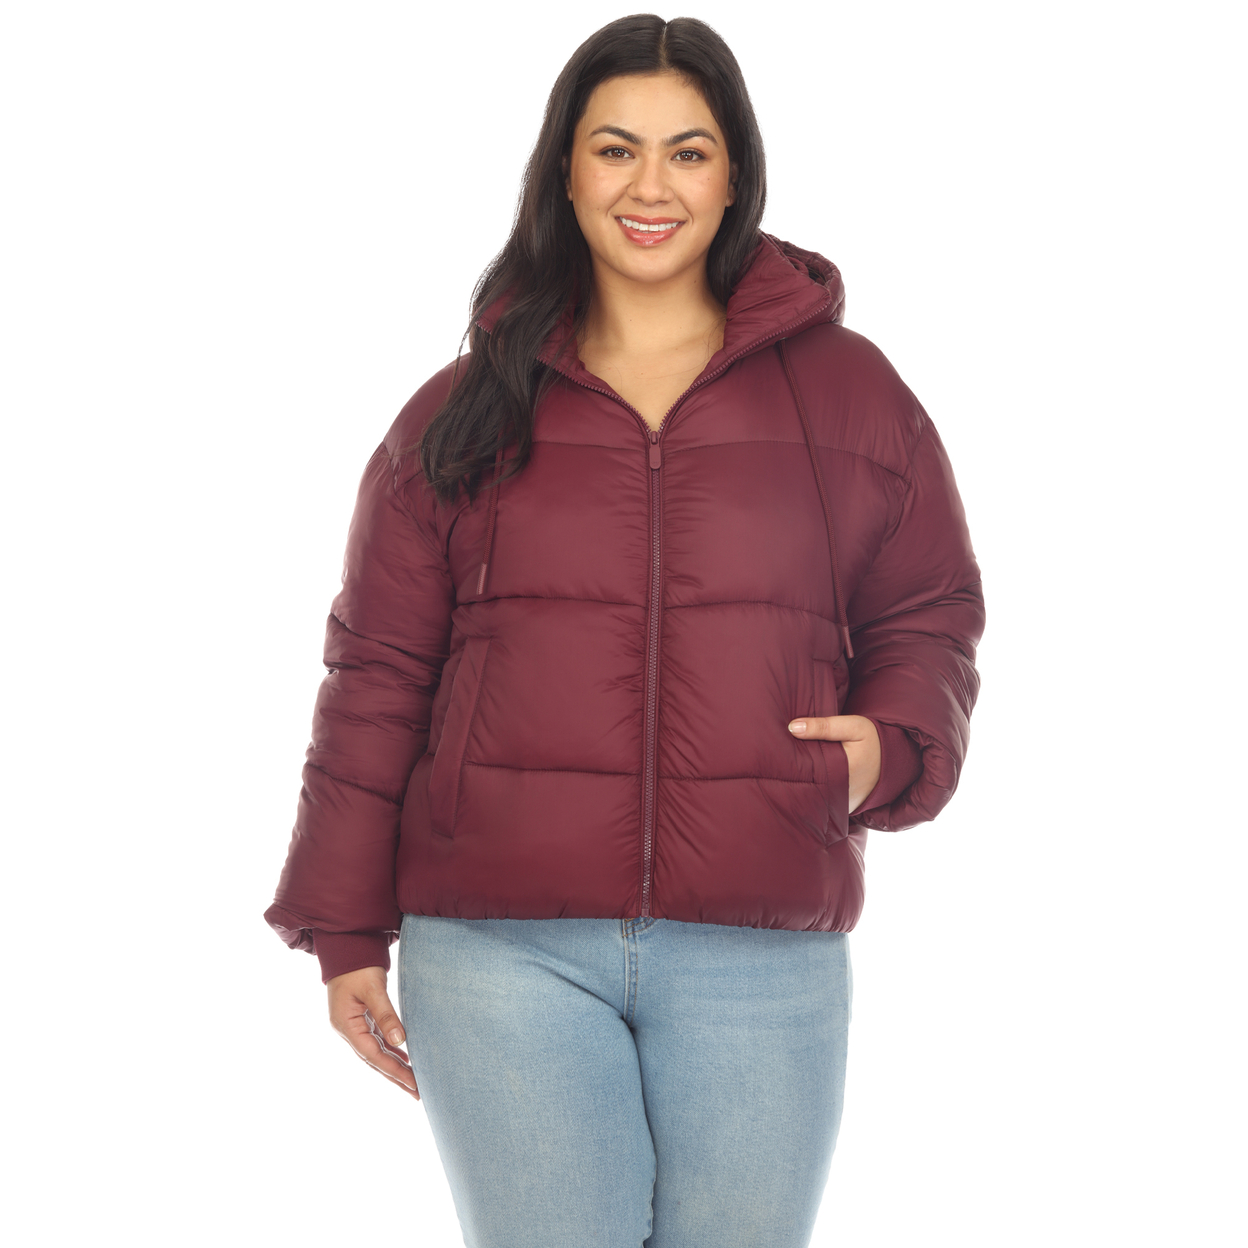 White Mark Women's Zip Hooded Puffer Jacket With Pockets - Burgundy, 1x